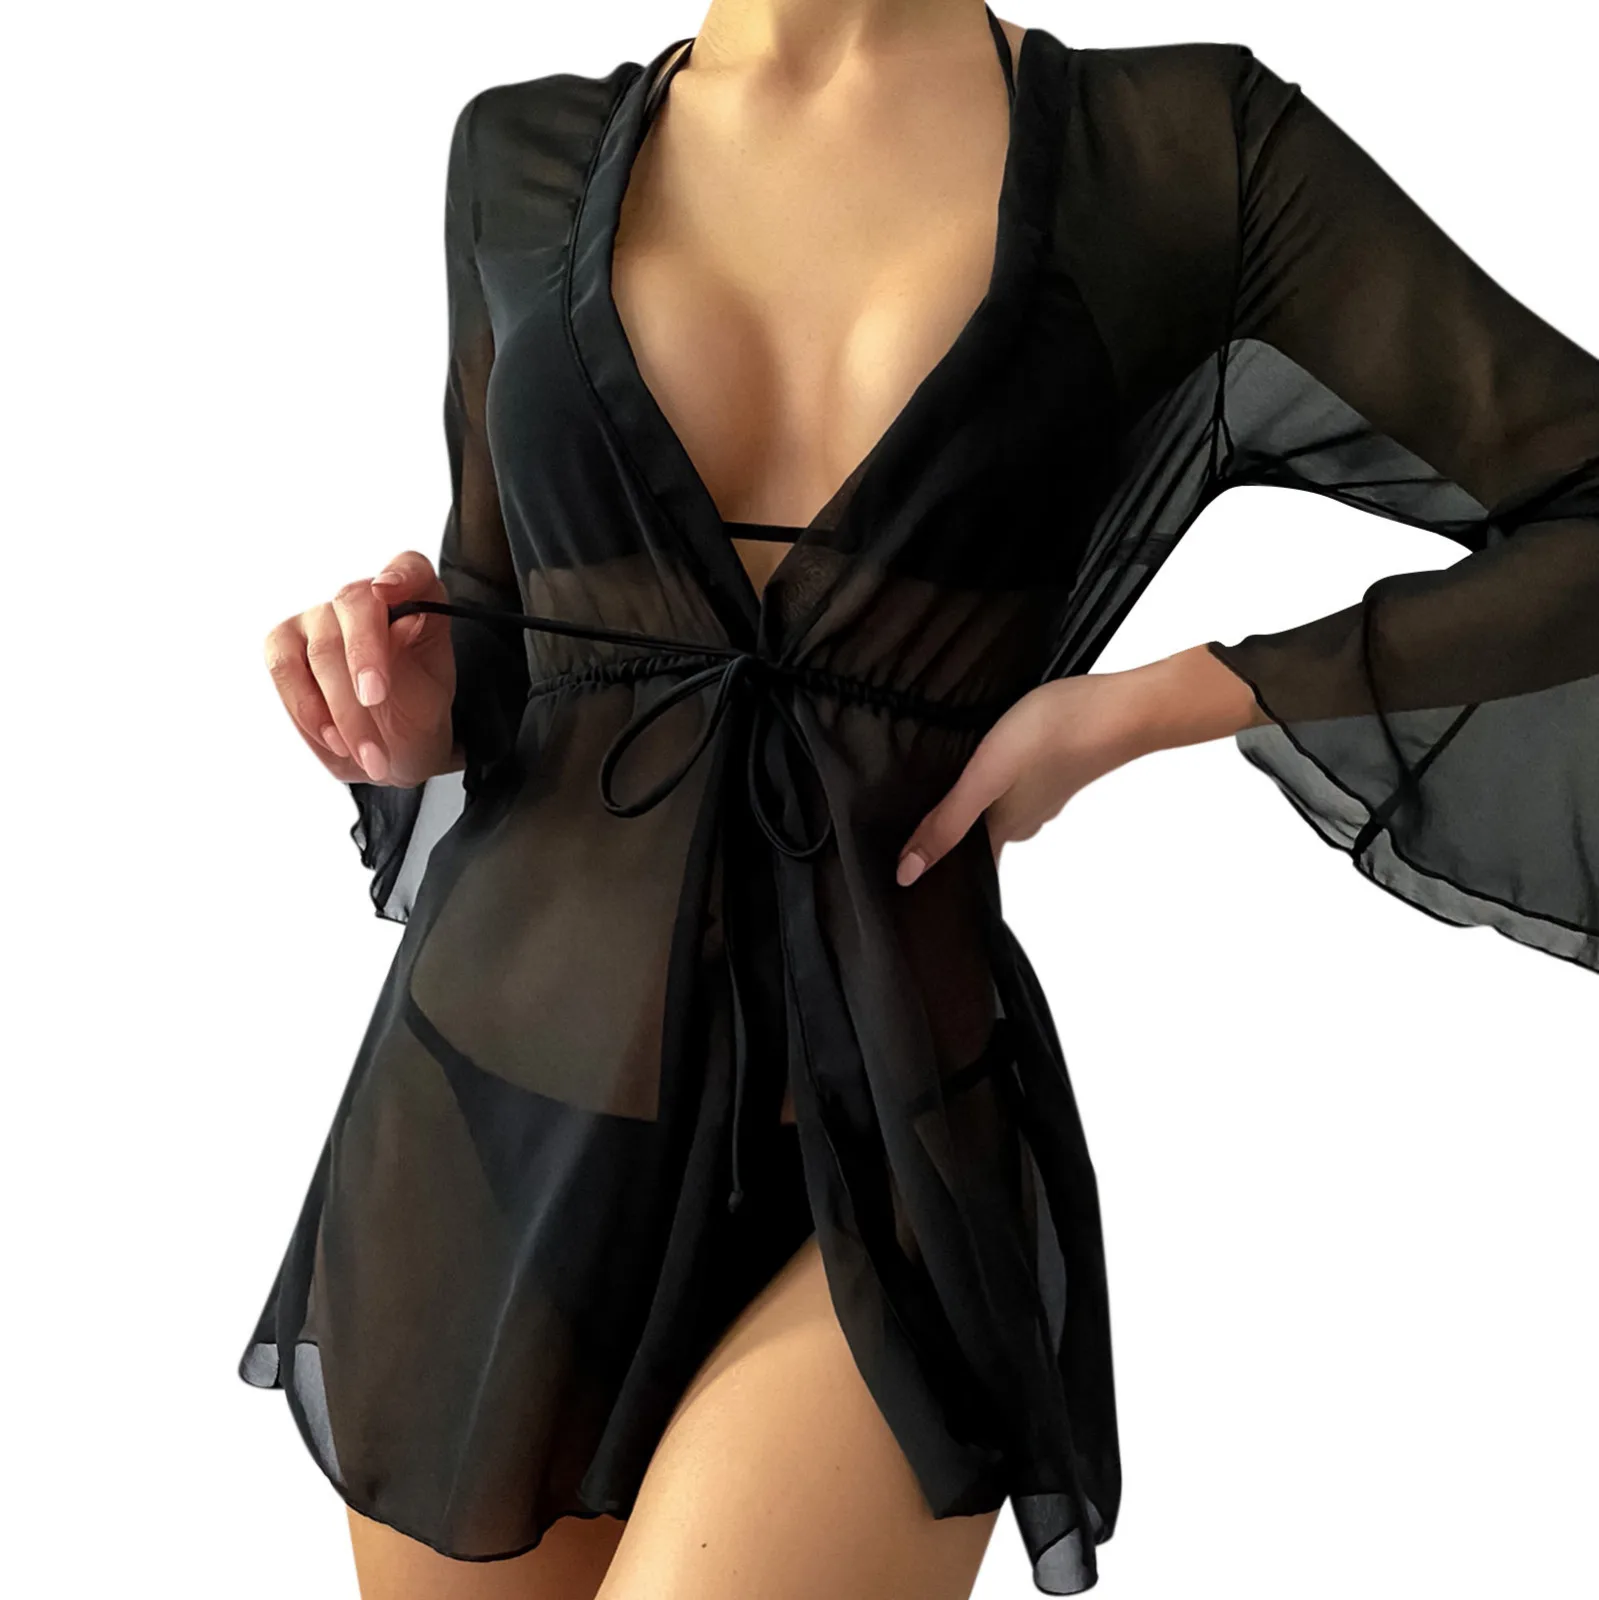 

V Neck Women Swimsuit Sheer Mesh Cover Ups Shorts Beach Cover Up Beach Wrap Bikini Wraps Solid Pom Sheer Lace Up Bathing Suit